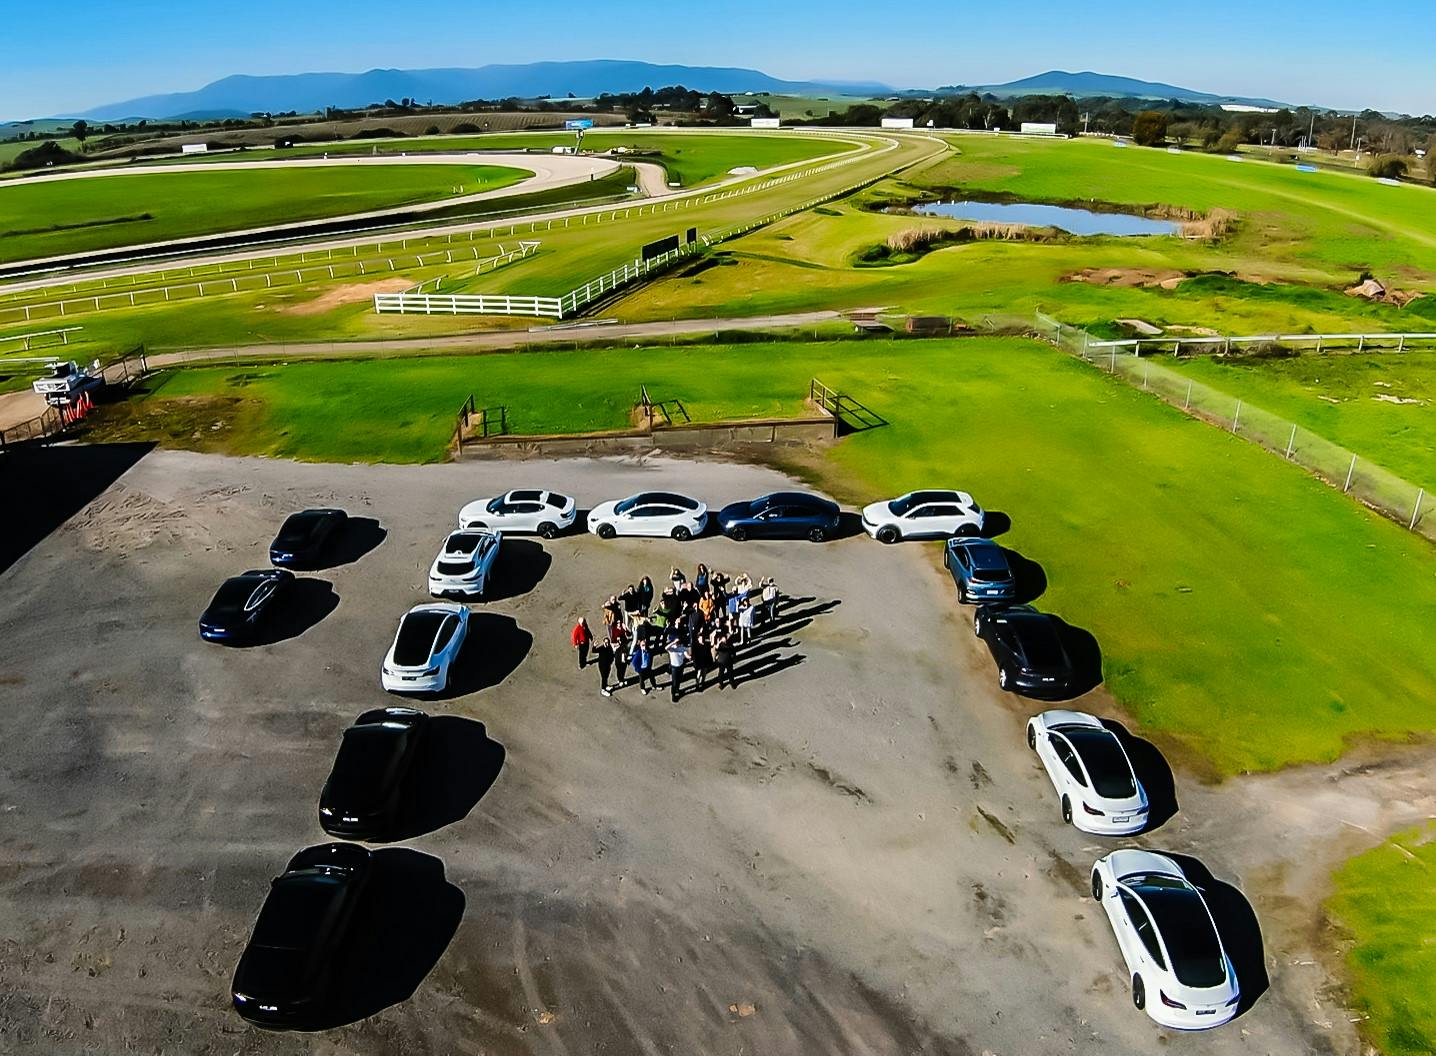 18 cars in formation in a green landscape